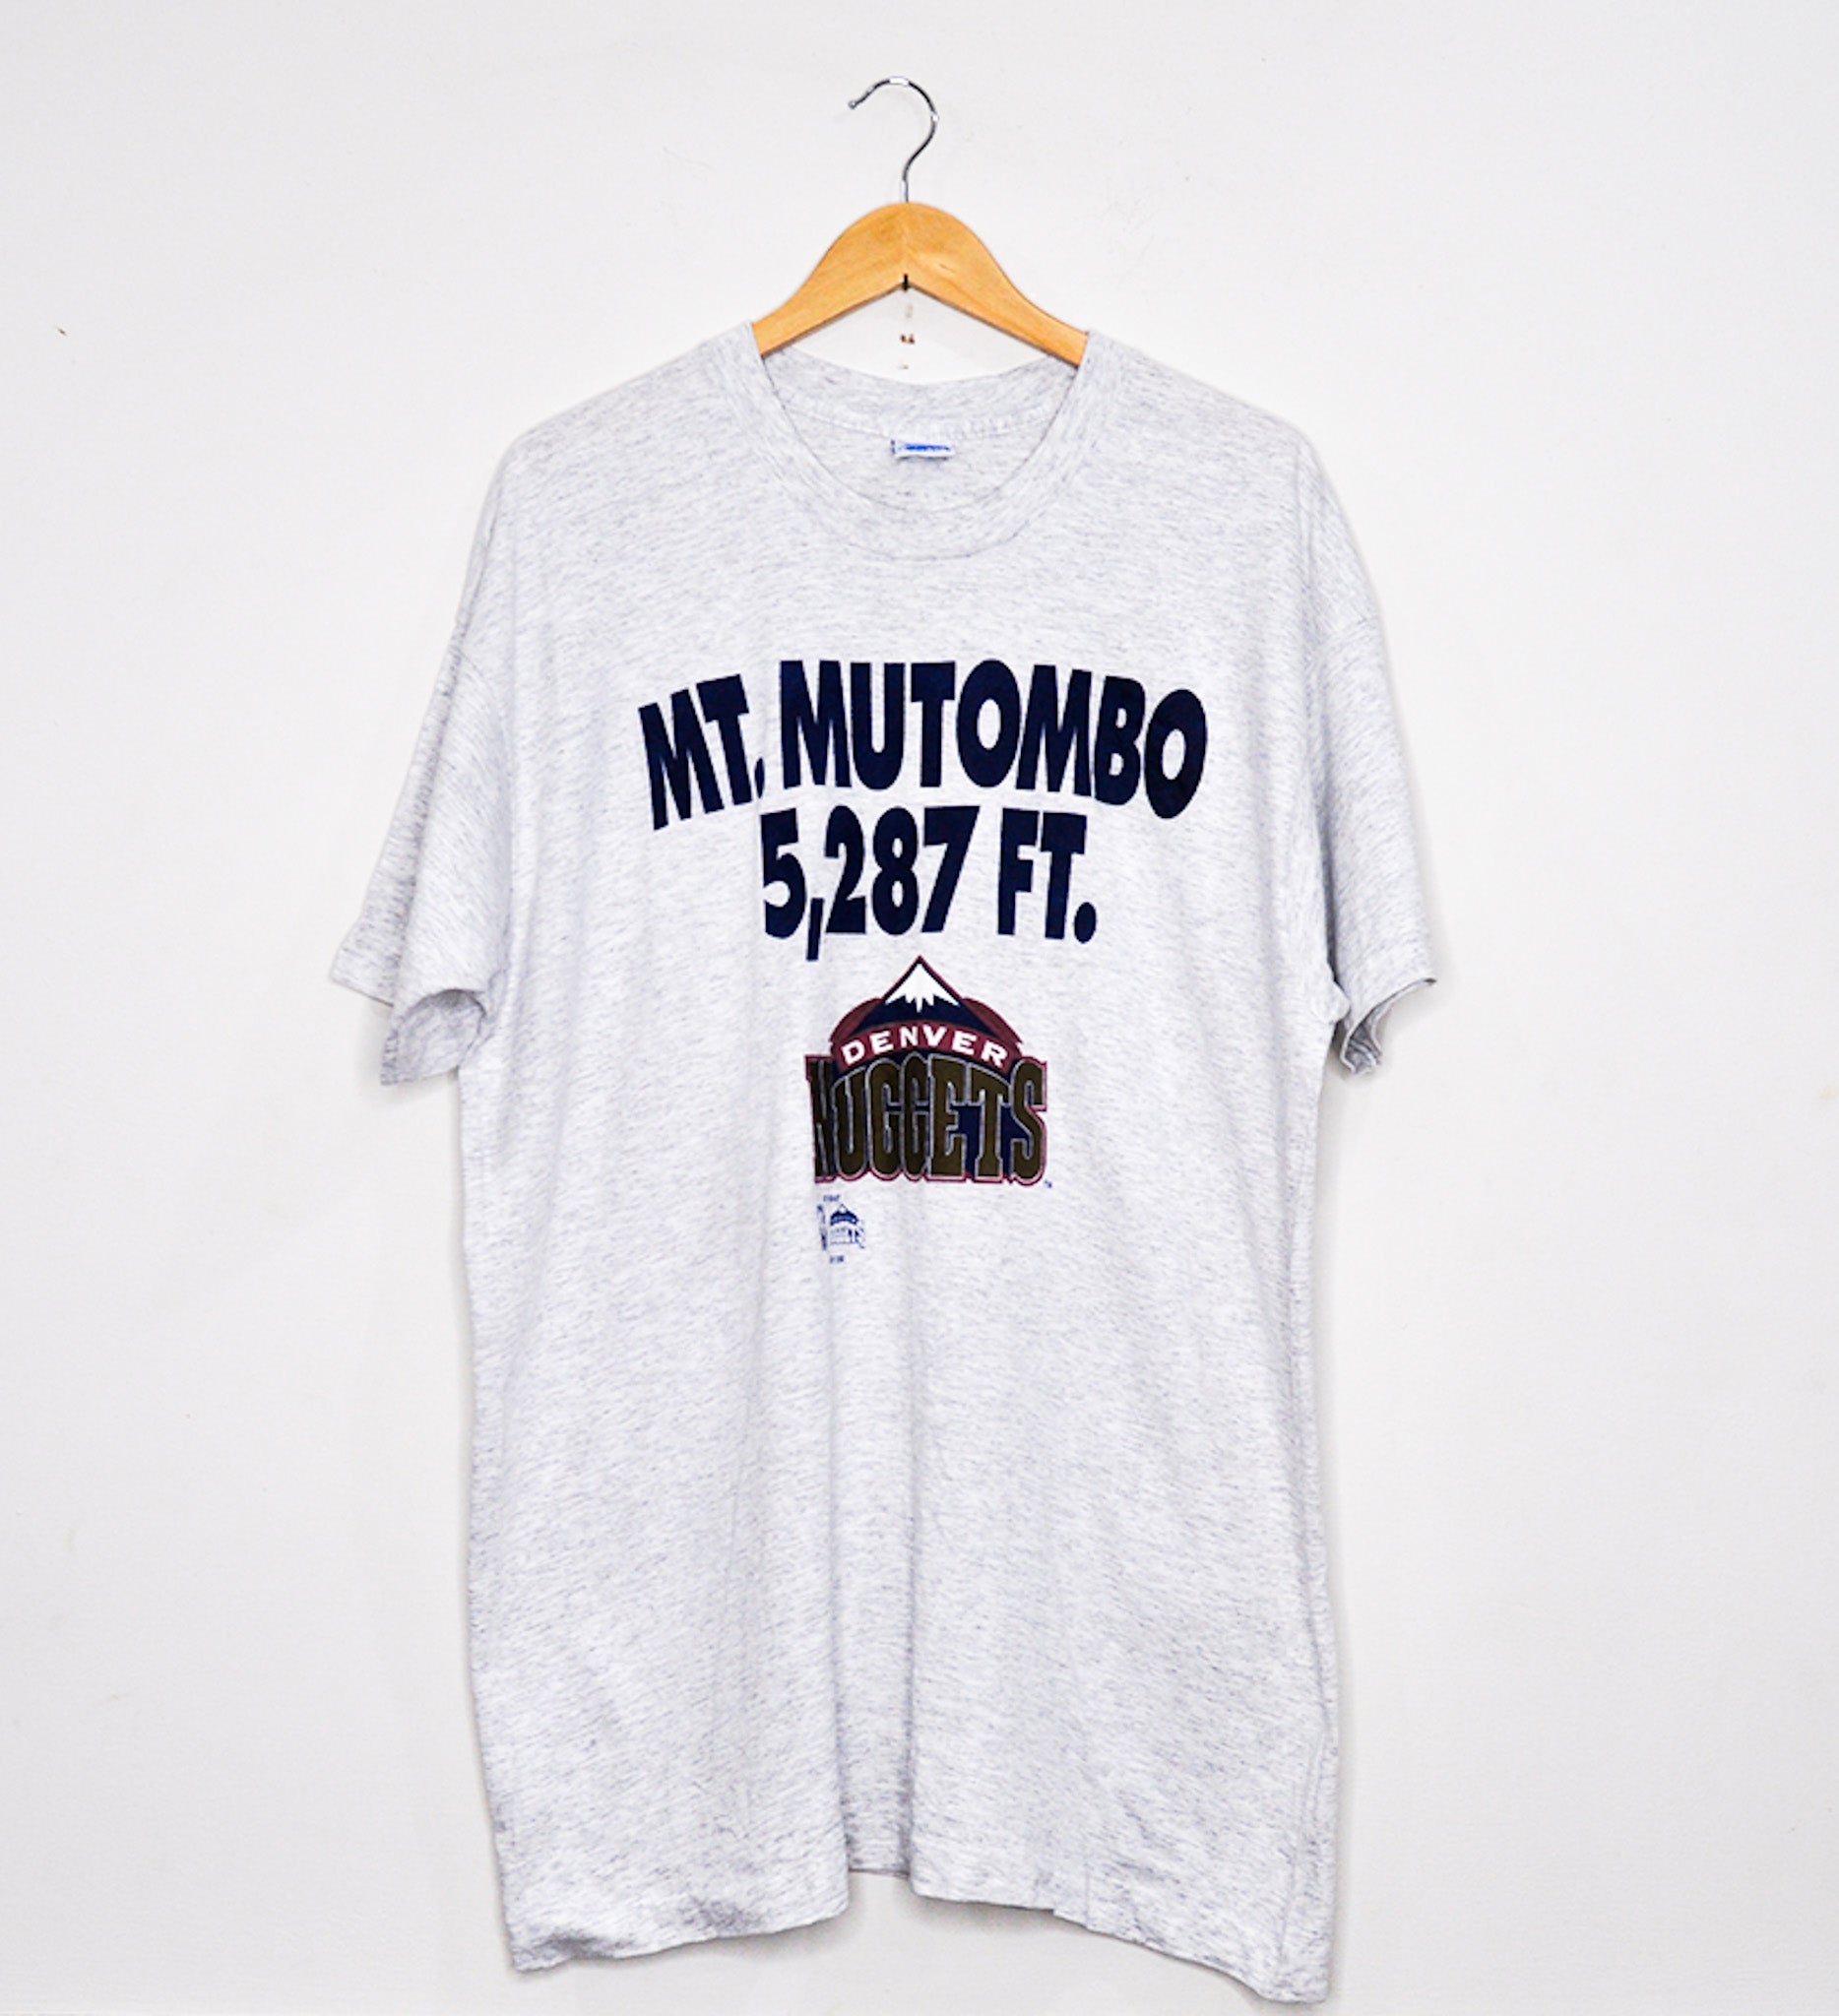 DENVER NUGGETS "Mt. Mutombo 5,287 Ft." TEE